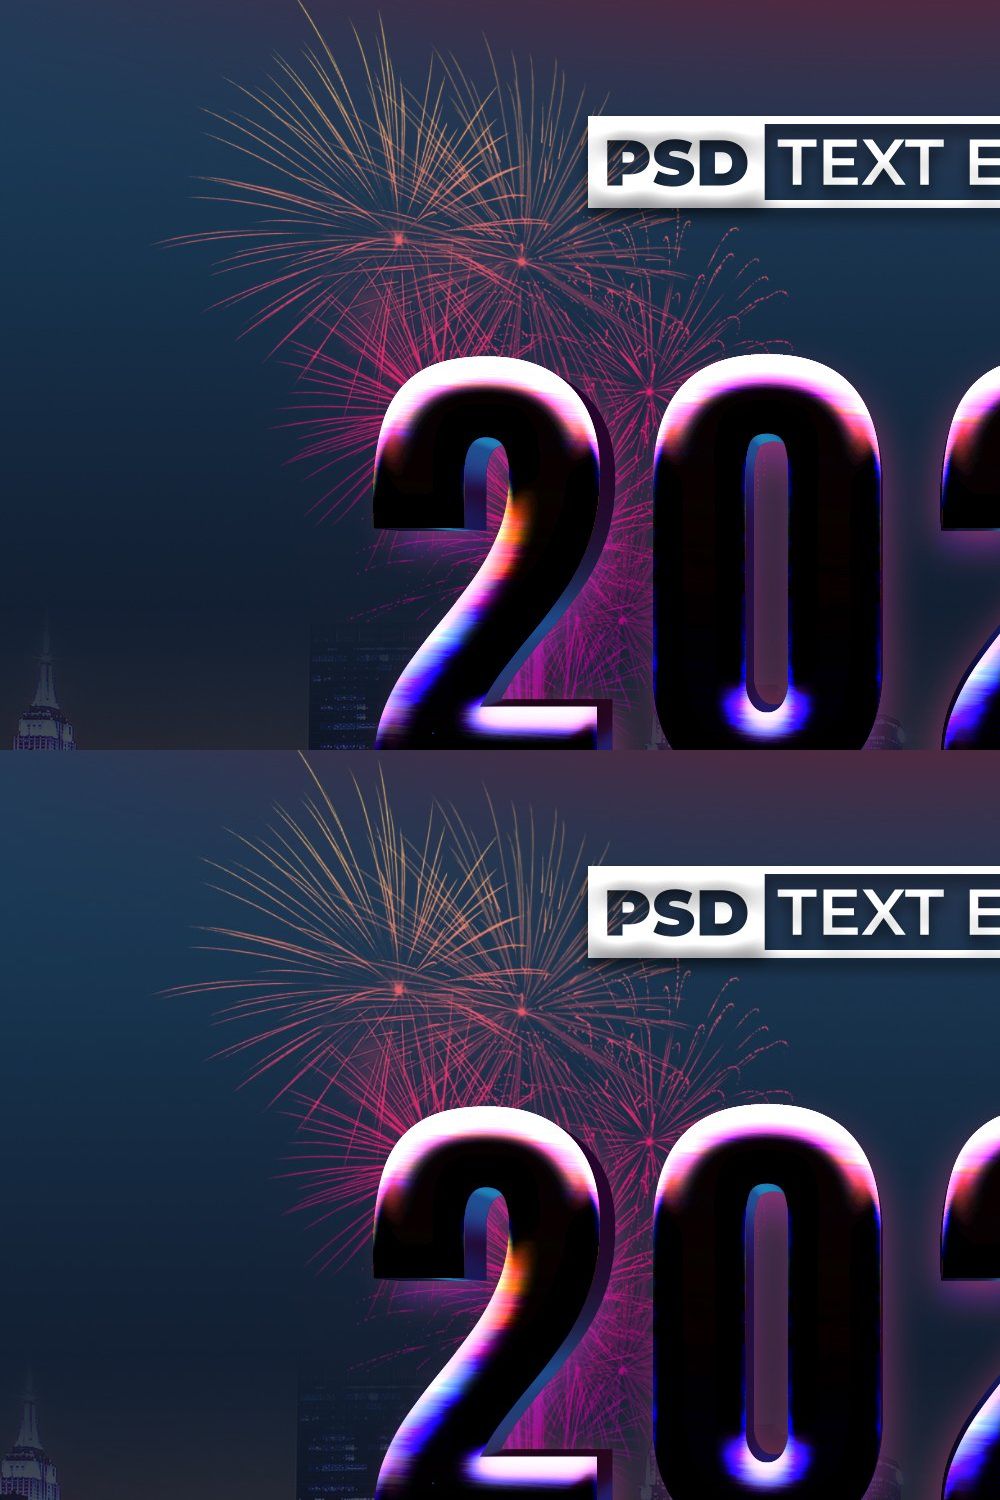 Colorful text effect new year style pinterest preview image.